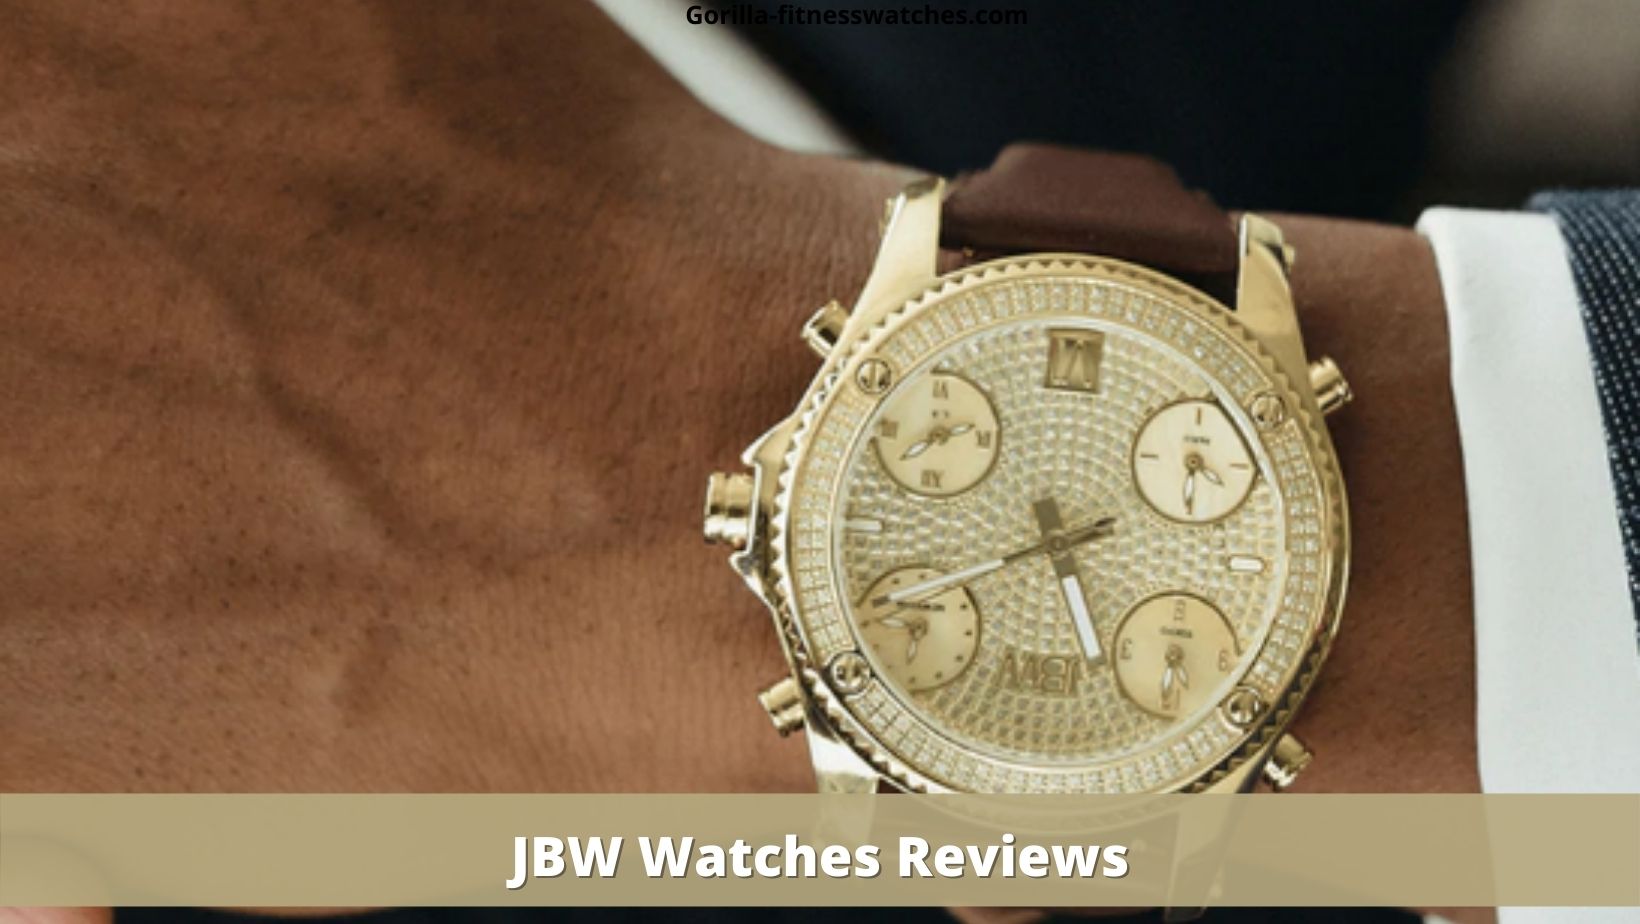 JBW Watches Reviews